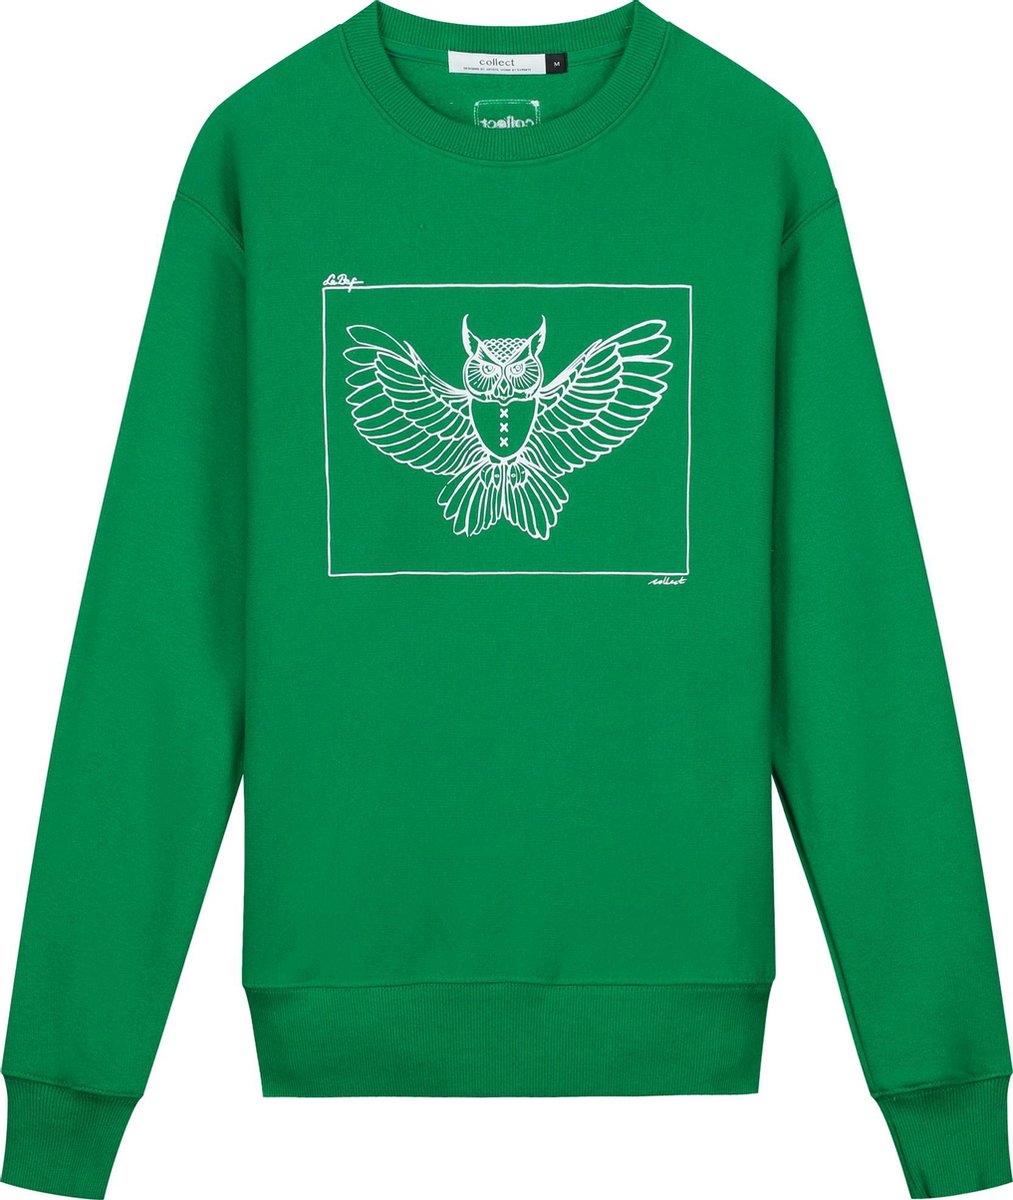 Collect The Label - Hippe Trui - Uil Sweater - Groen - Unisex - XXS